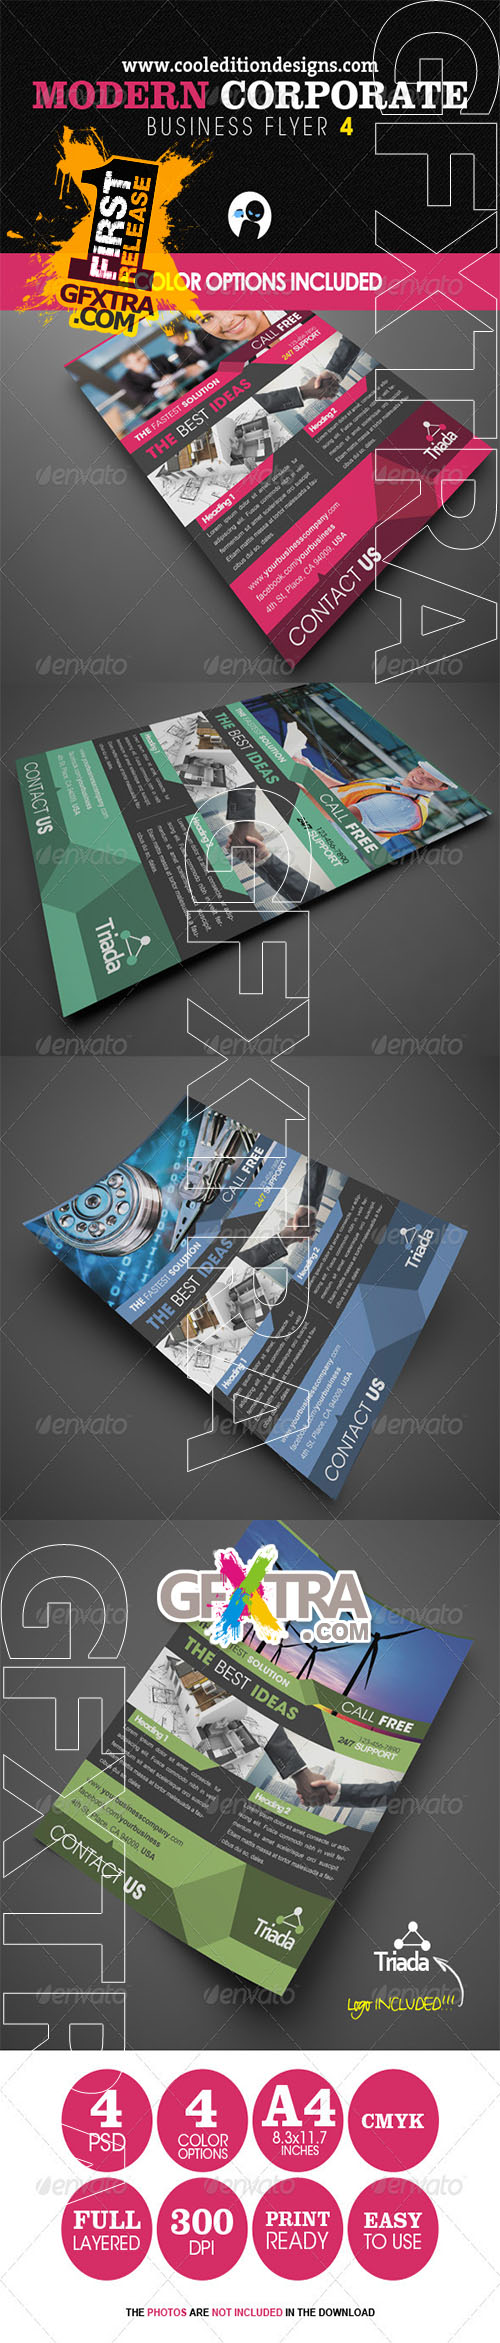 GraphicRiver - Modern Corporate Business Flyer 4